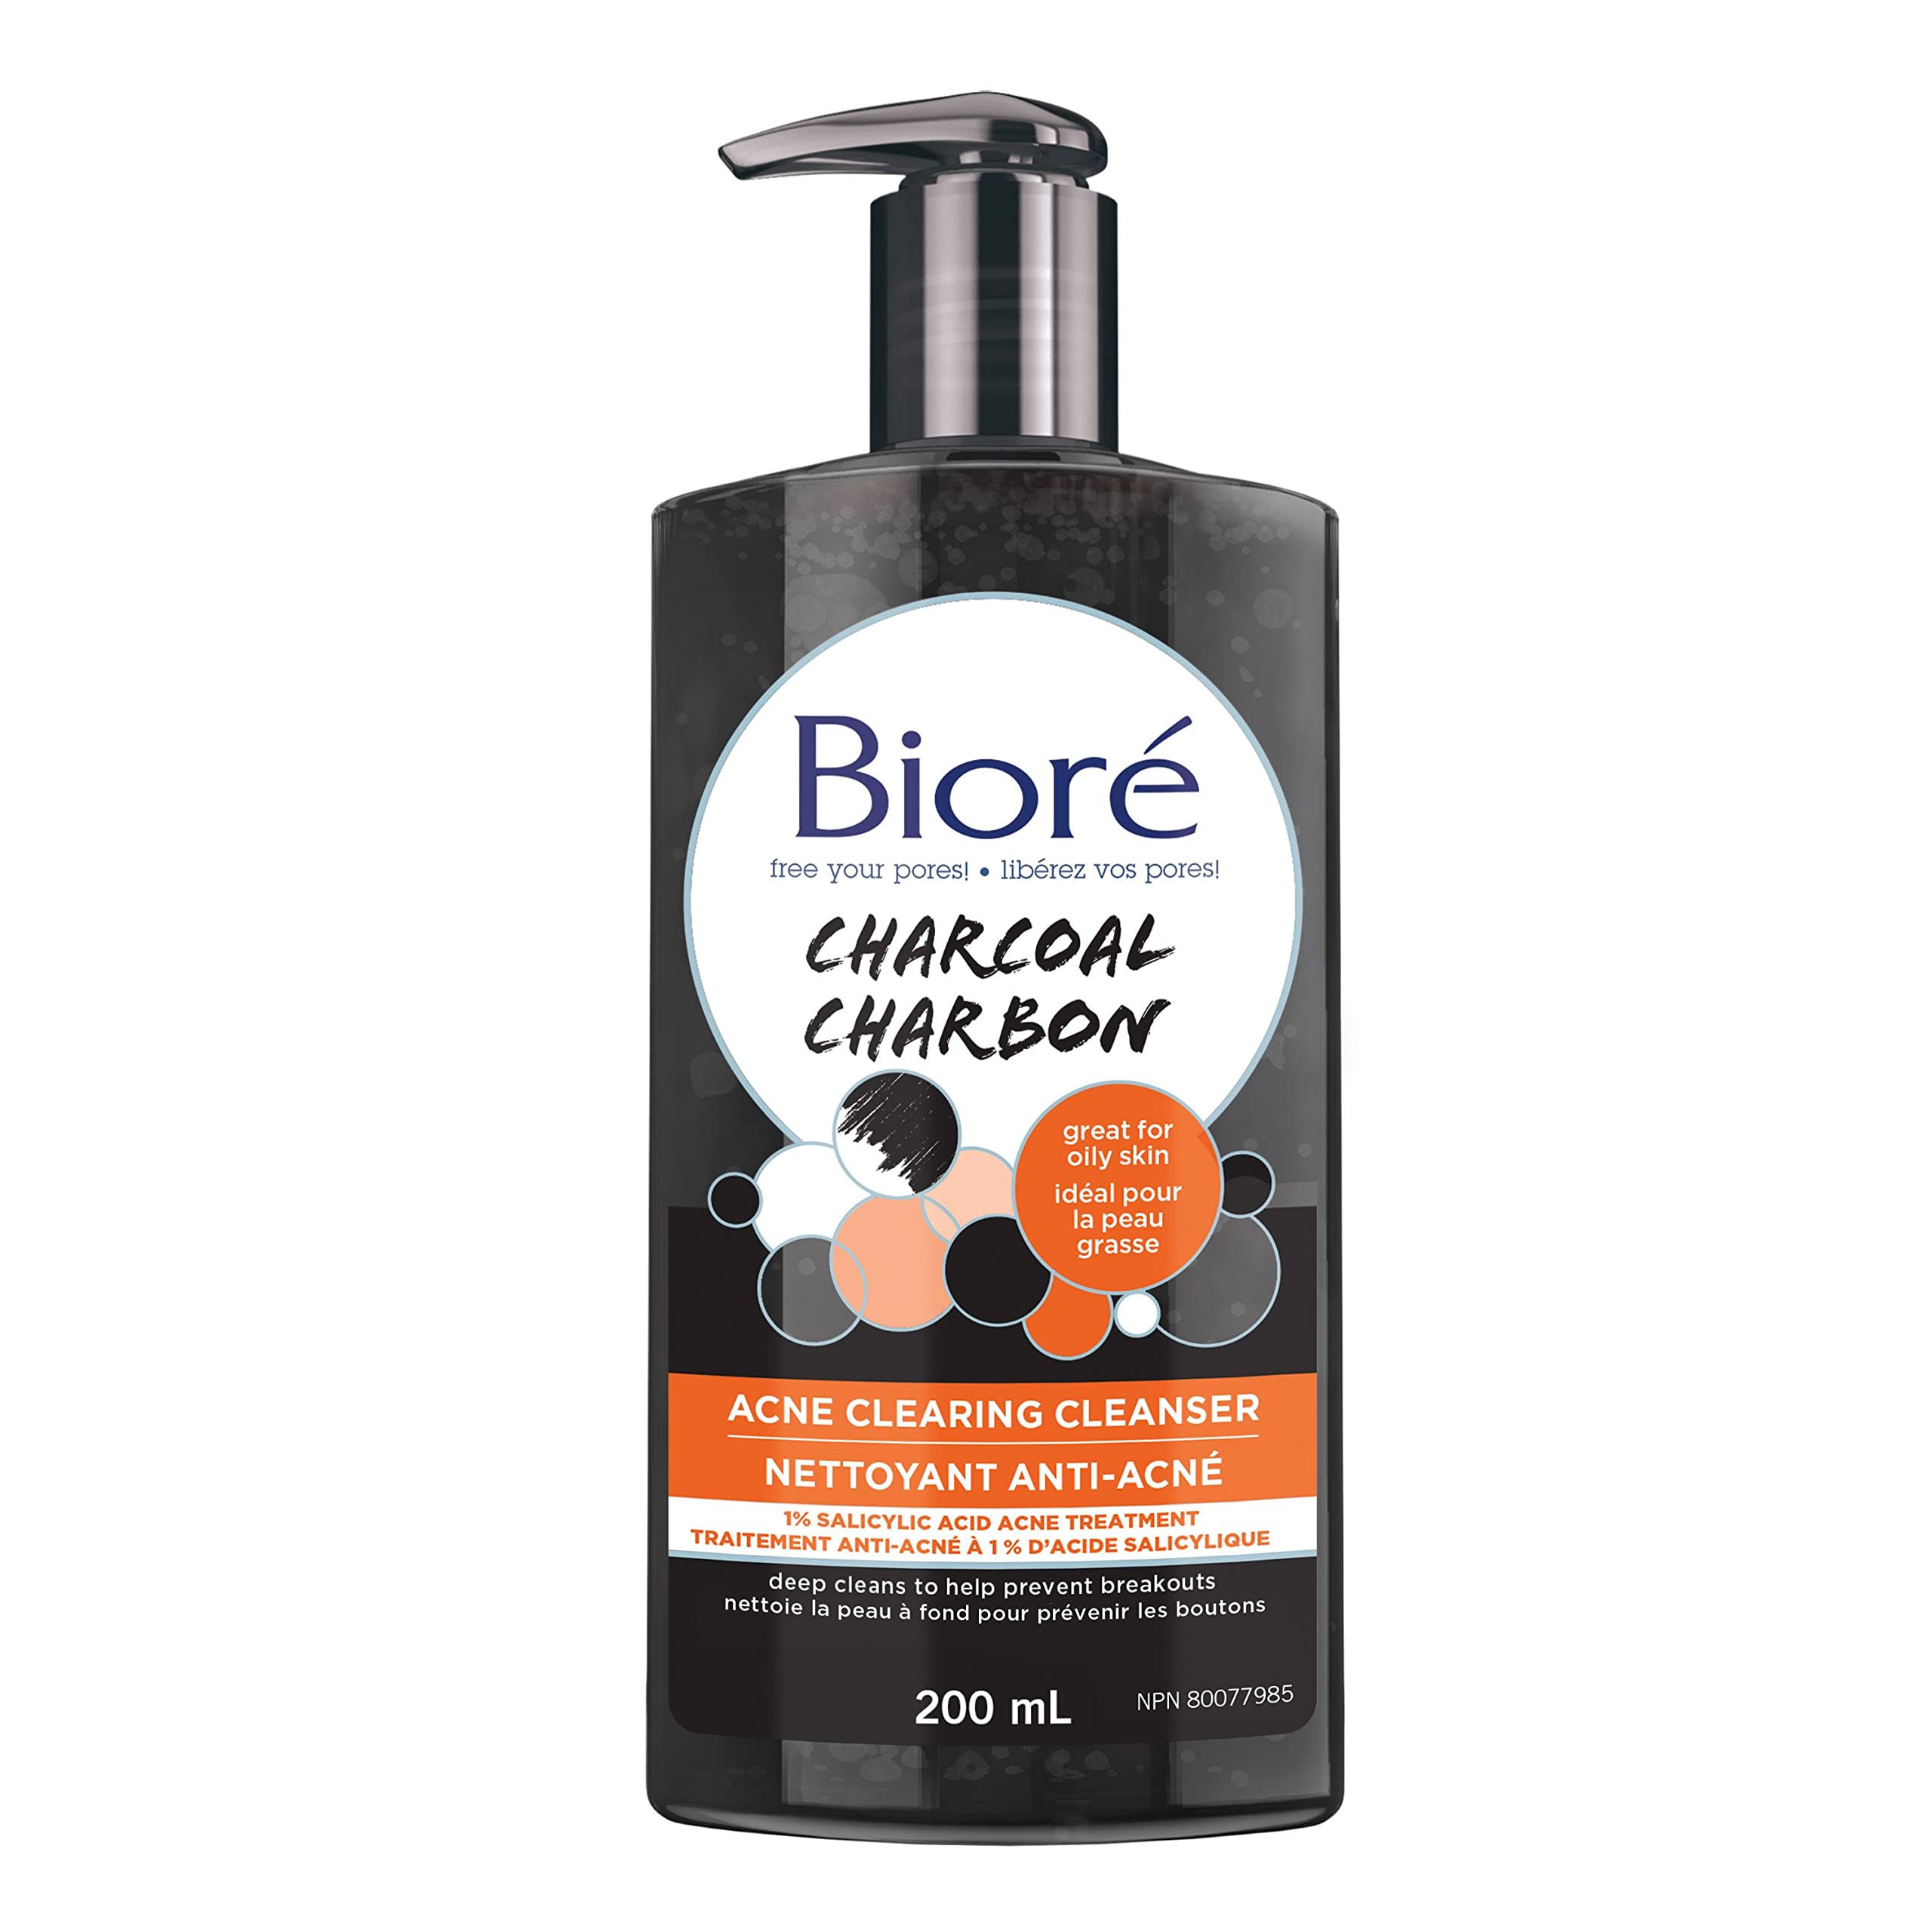 Biore Charcoal Acne Clearing Cleanser - 200ml